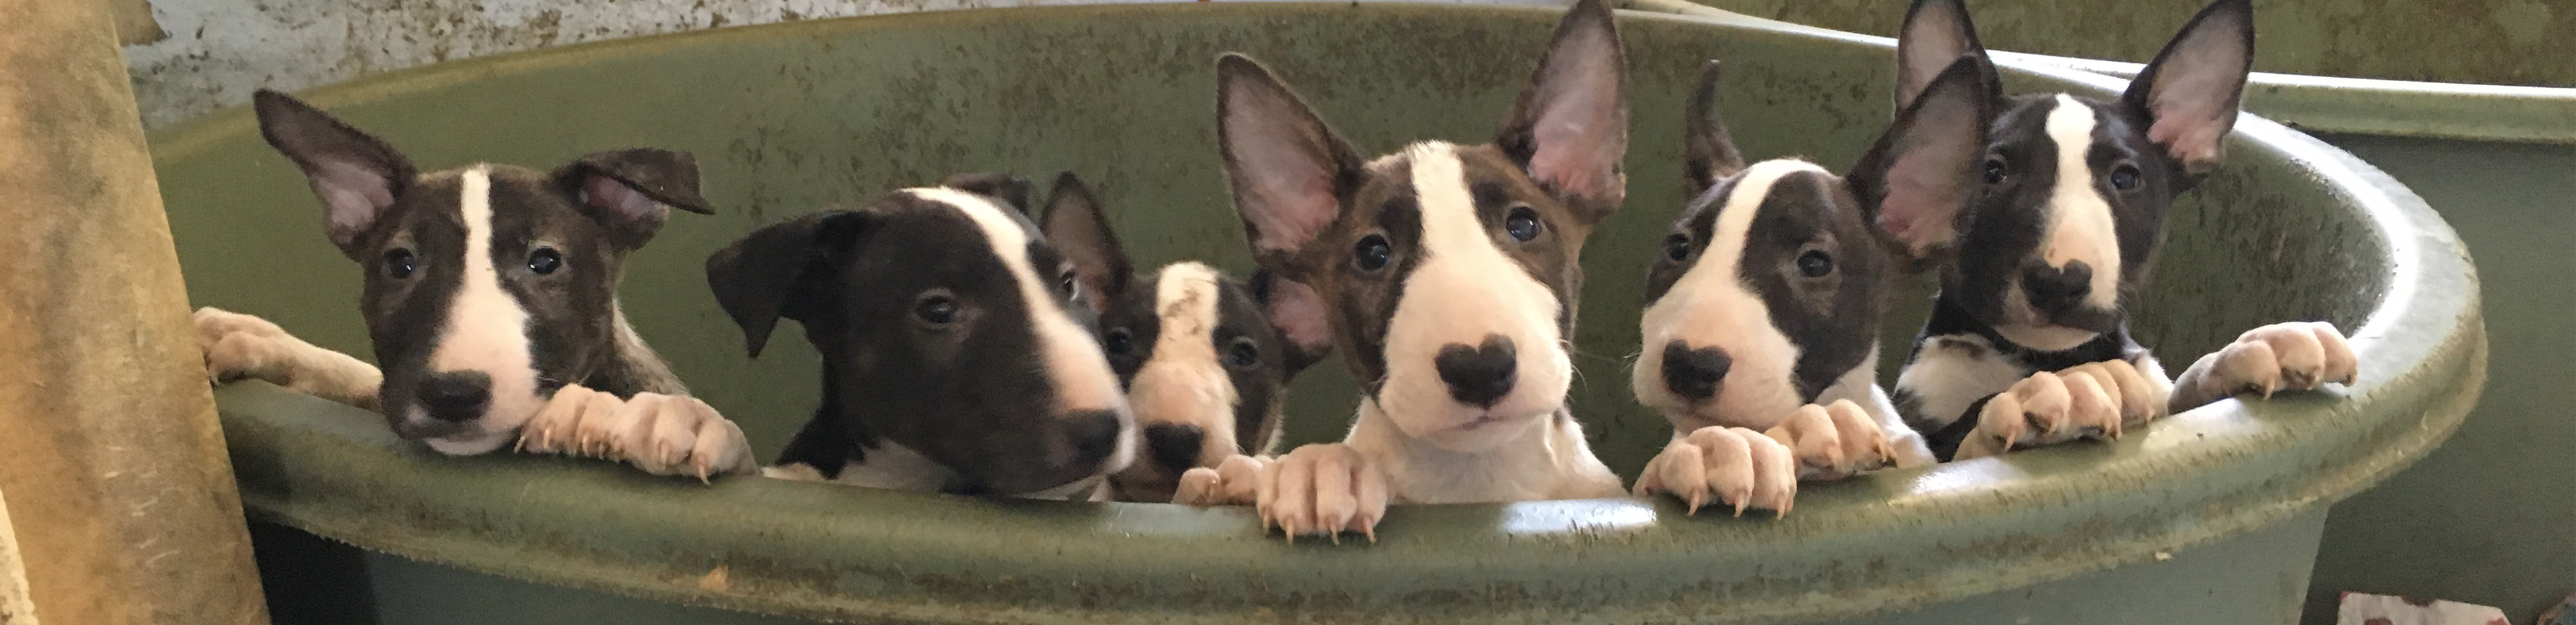 Bull Terrier Puppies from the Puppy Farm Raid in December 2018